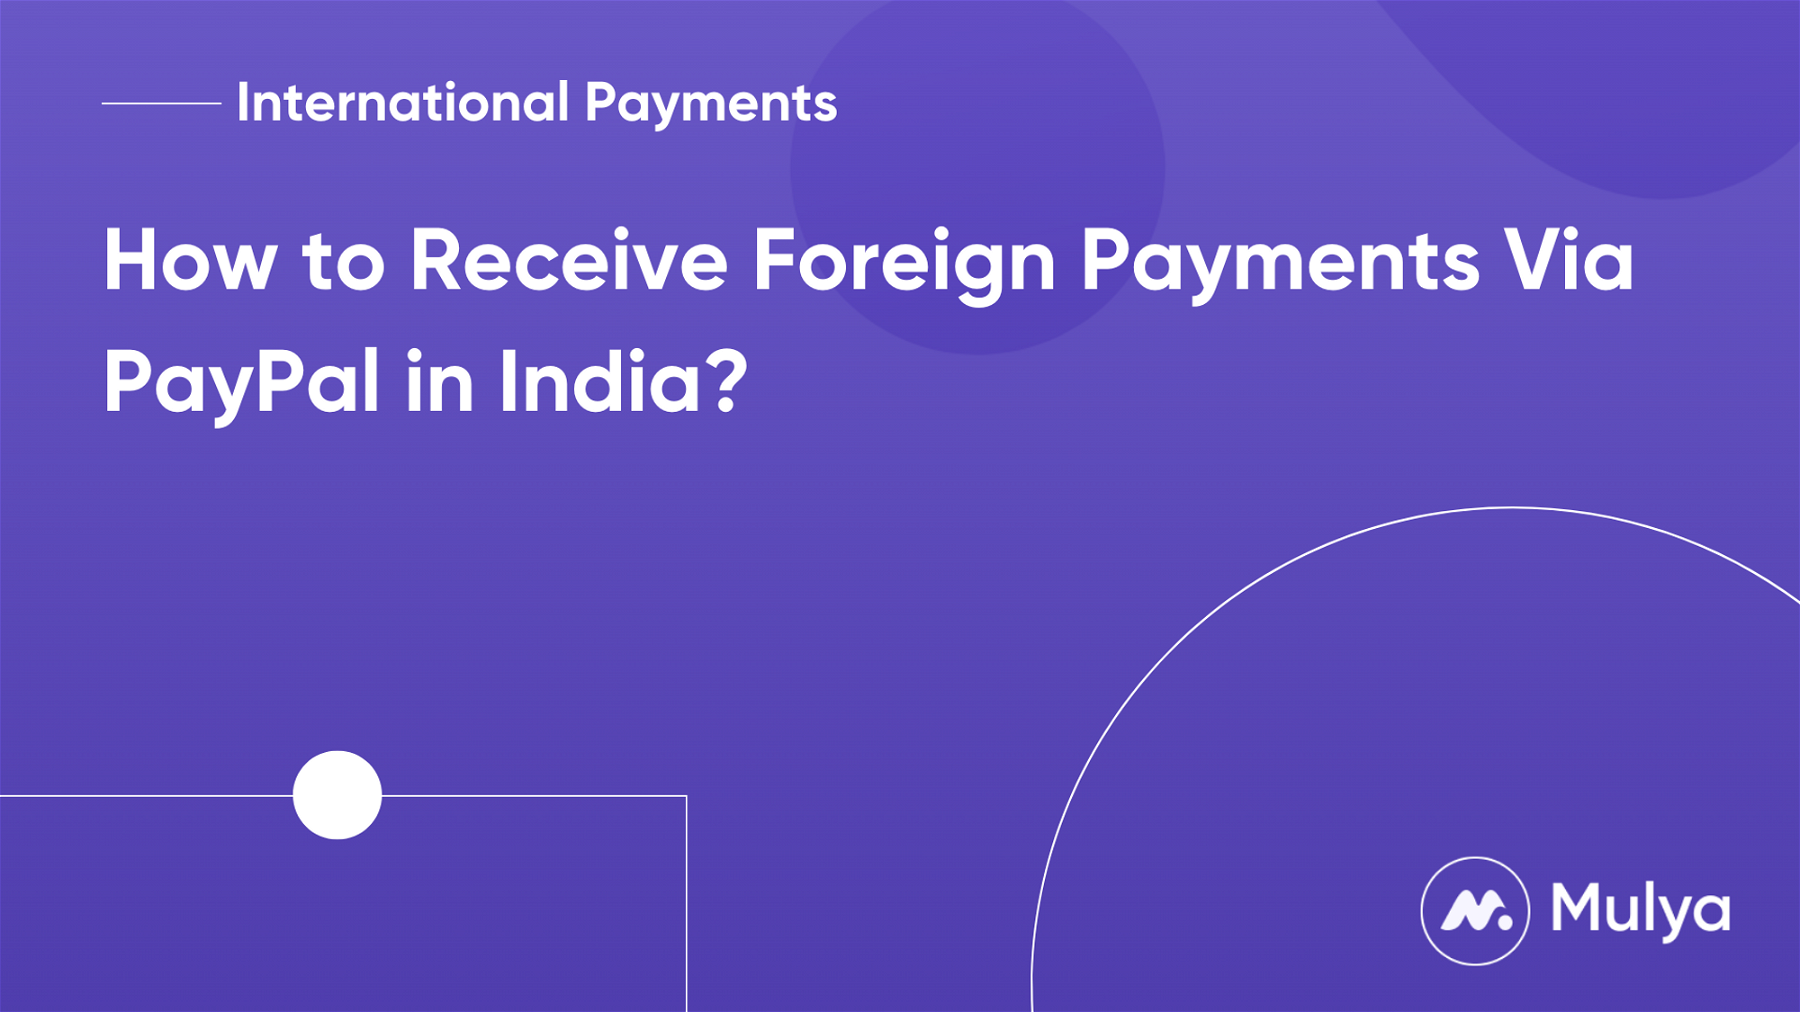 How to Receive Foreign Payments Via PayPal in India?